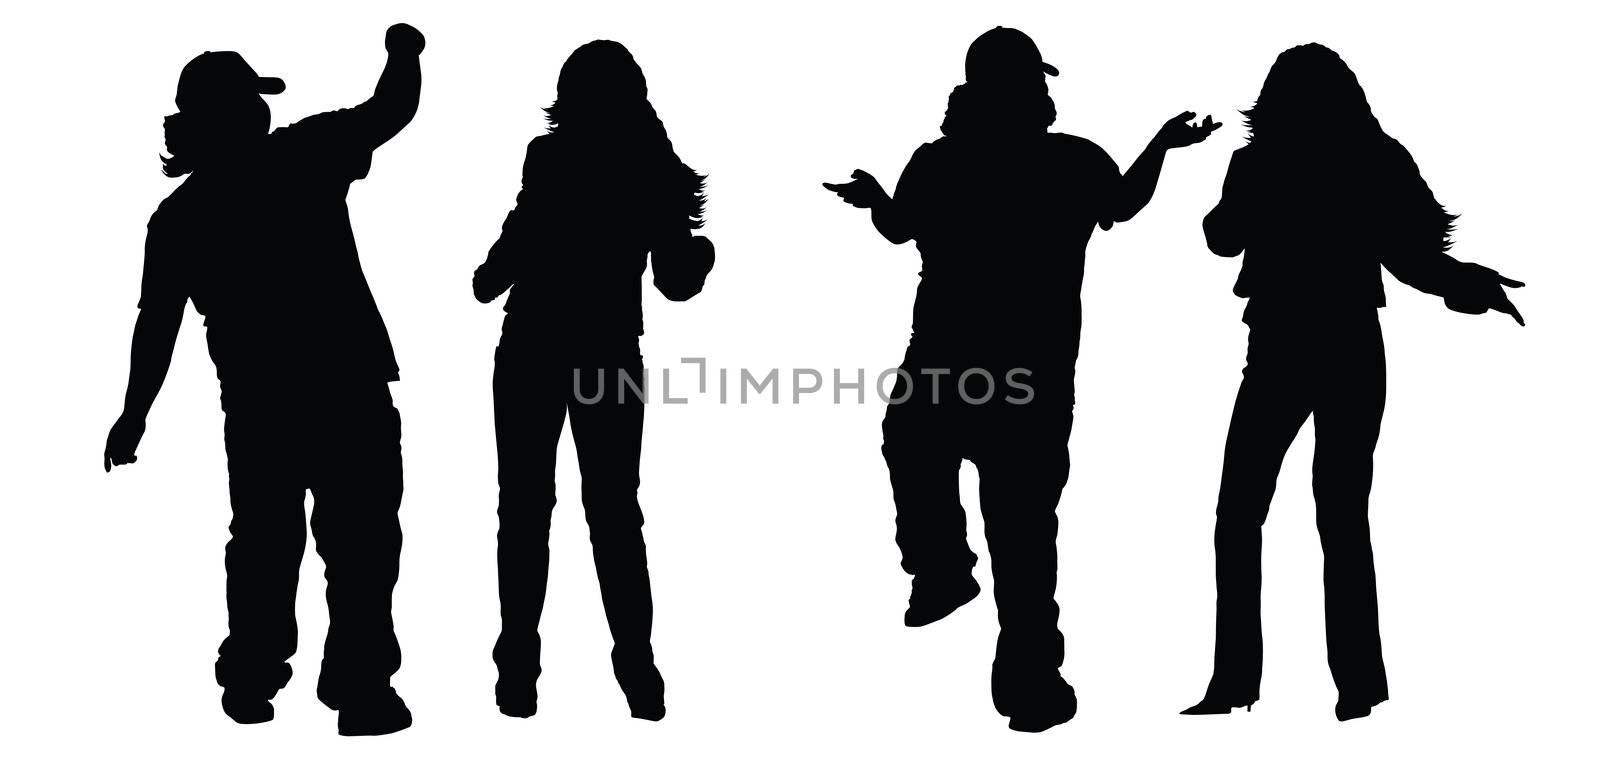 party concept, isolated people on white background (made from my images)